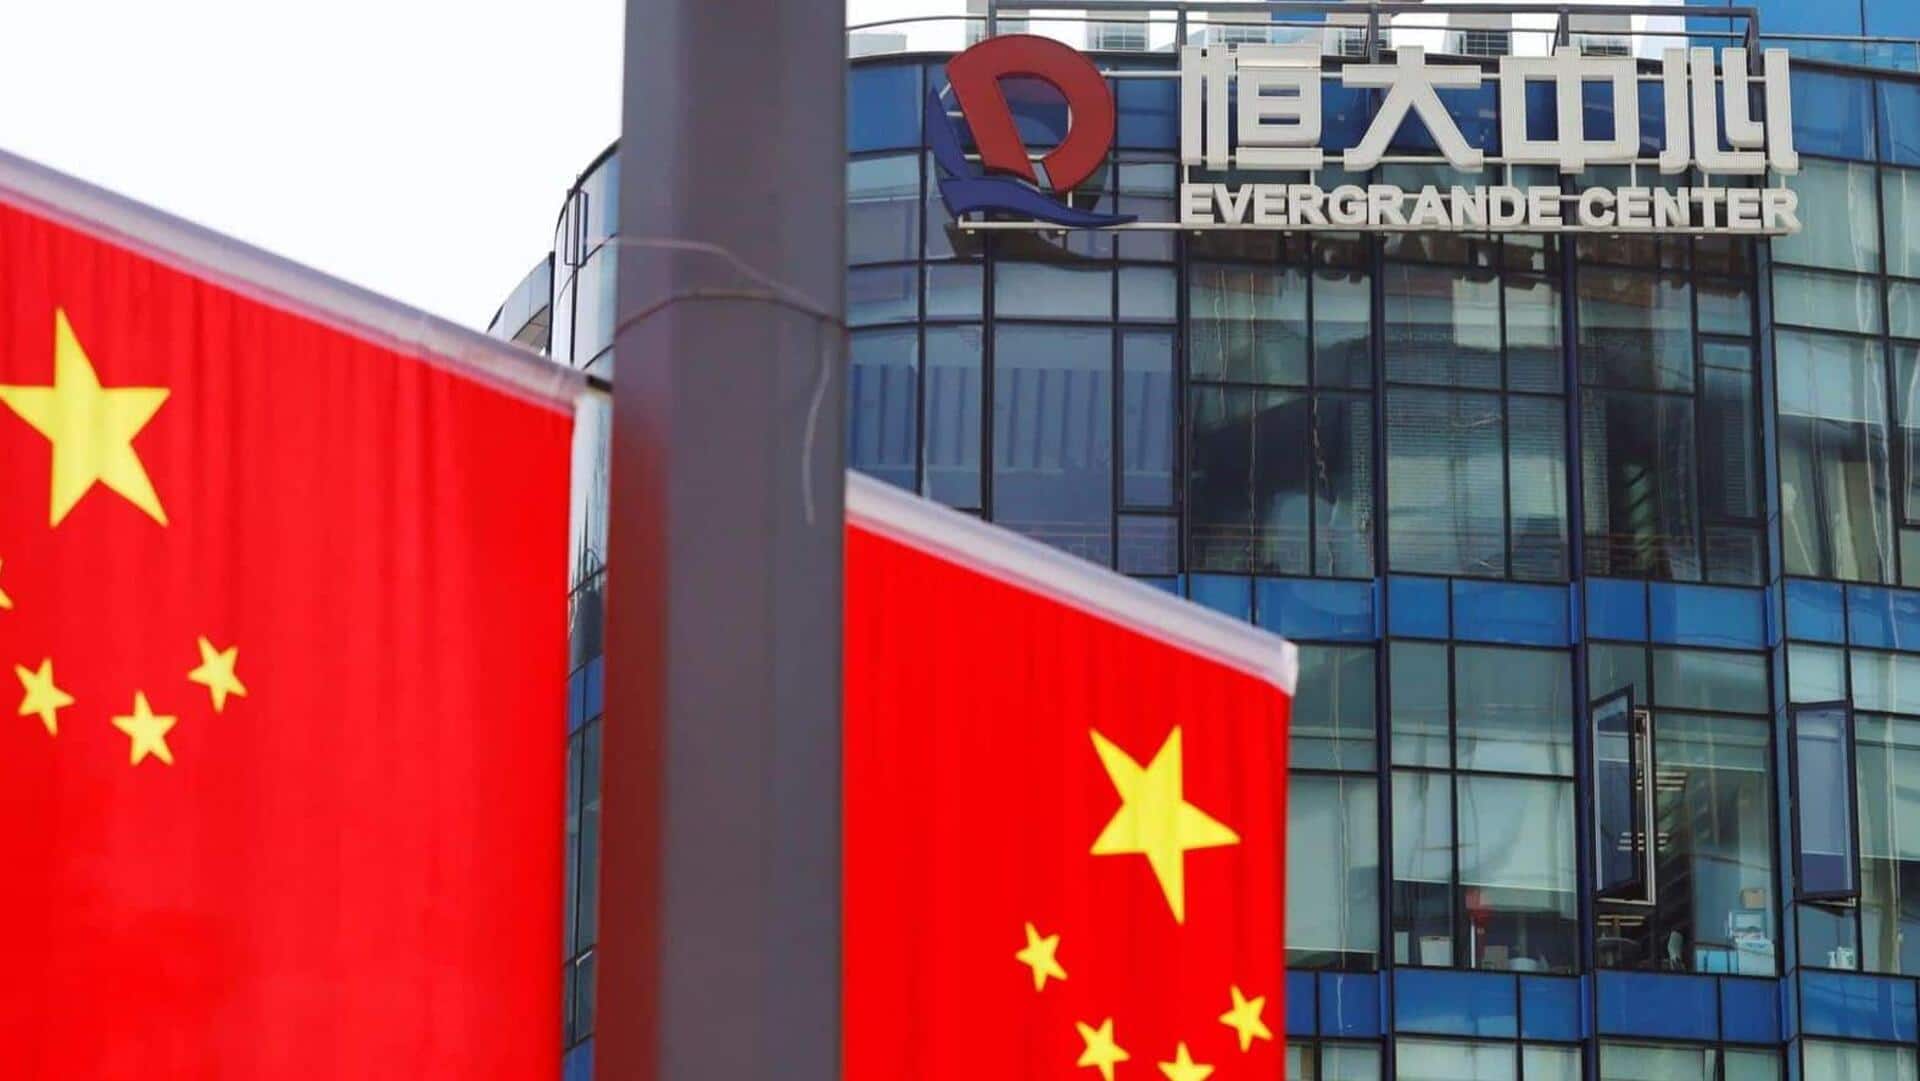 China Evergrande, with $300B in debt, ordered to liquidate